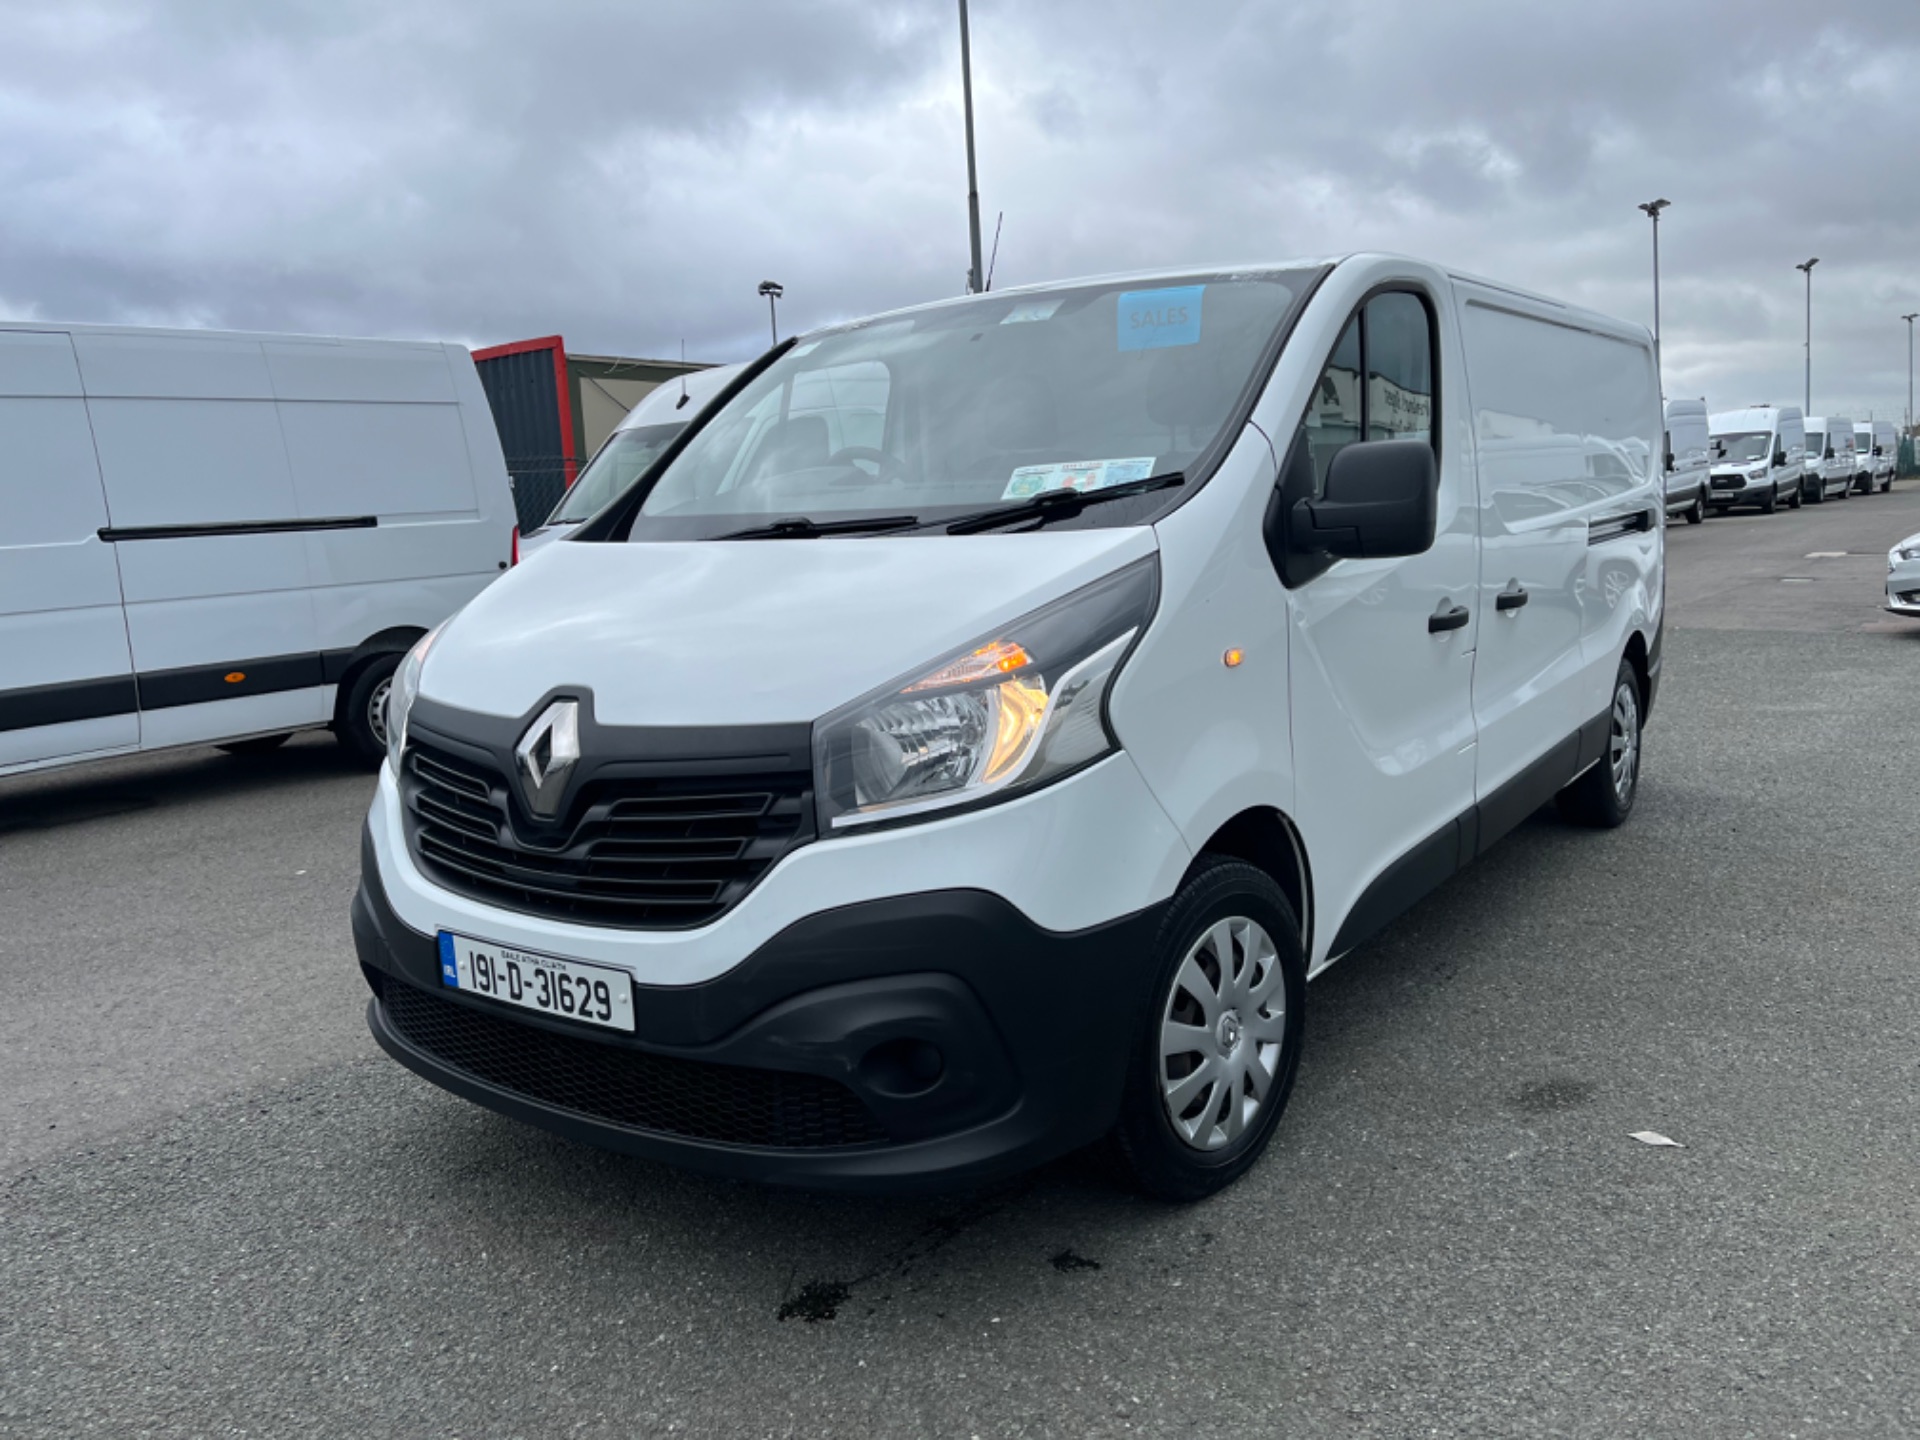 2019 Renault Trafic LL29 DCI 120 Business (191D31629) Thumbnail 7